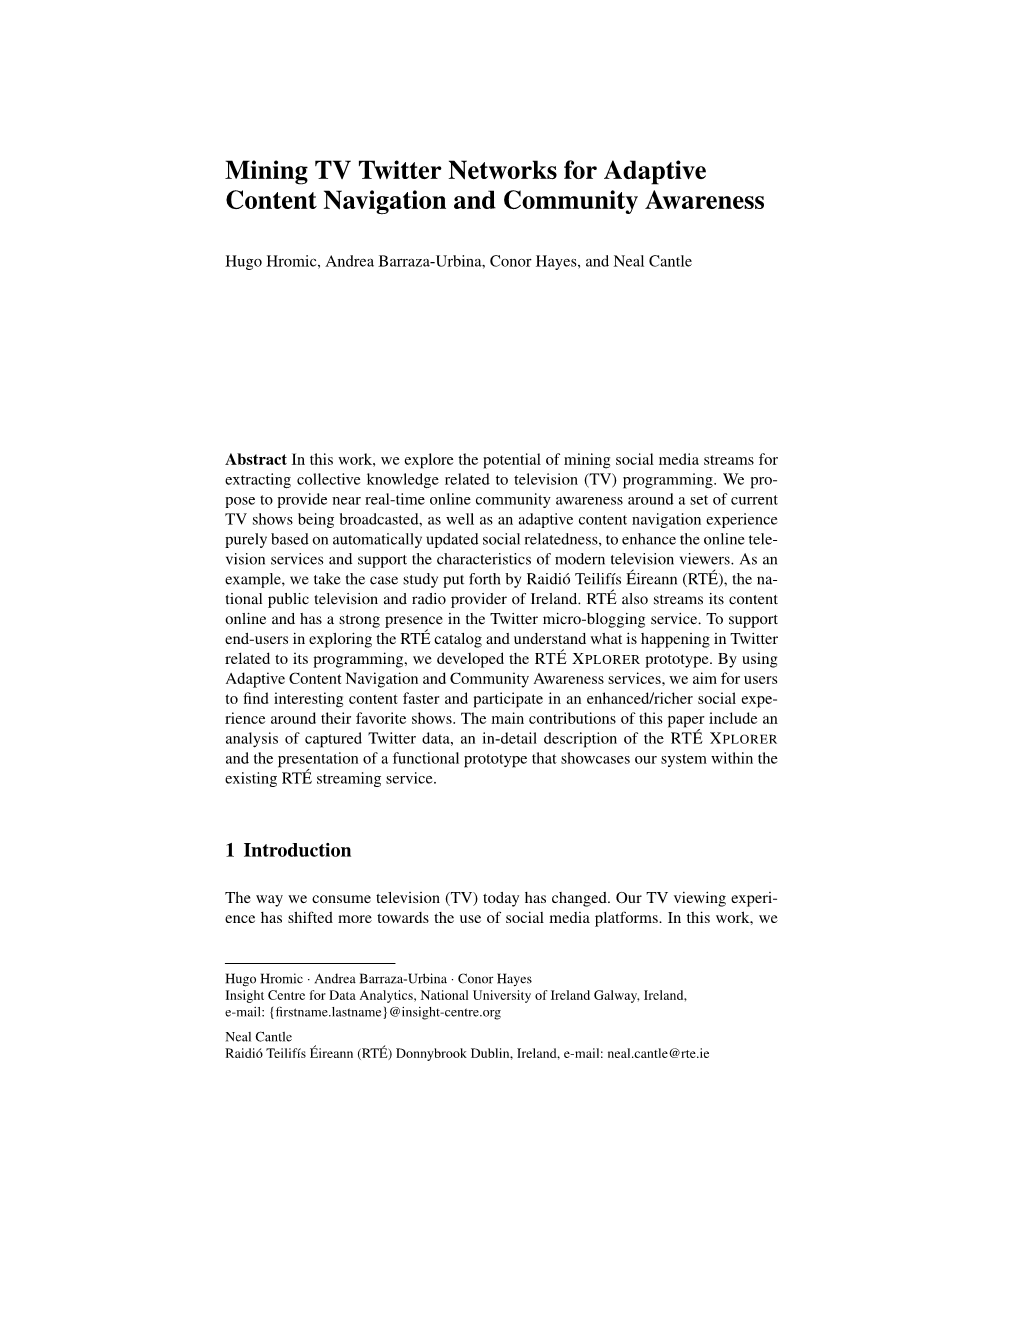 Mining TV Twitter Networks for Adaptive Content Navigation and Community Awareness